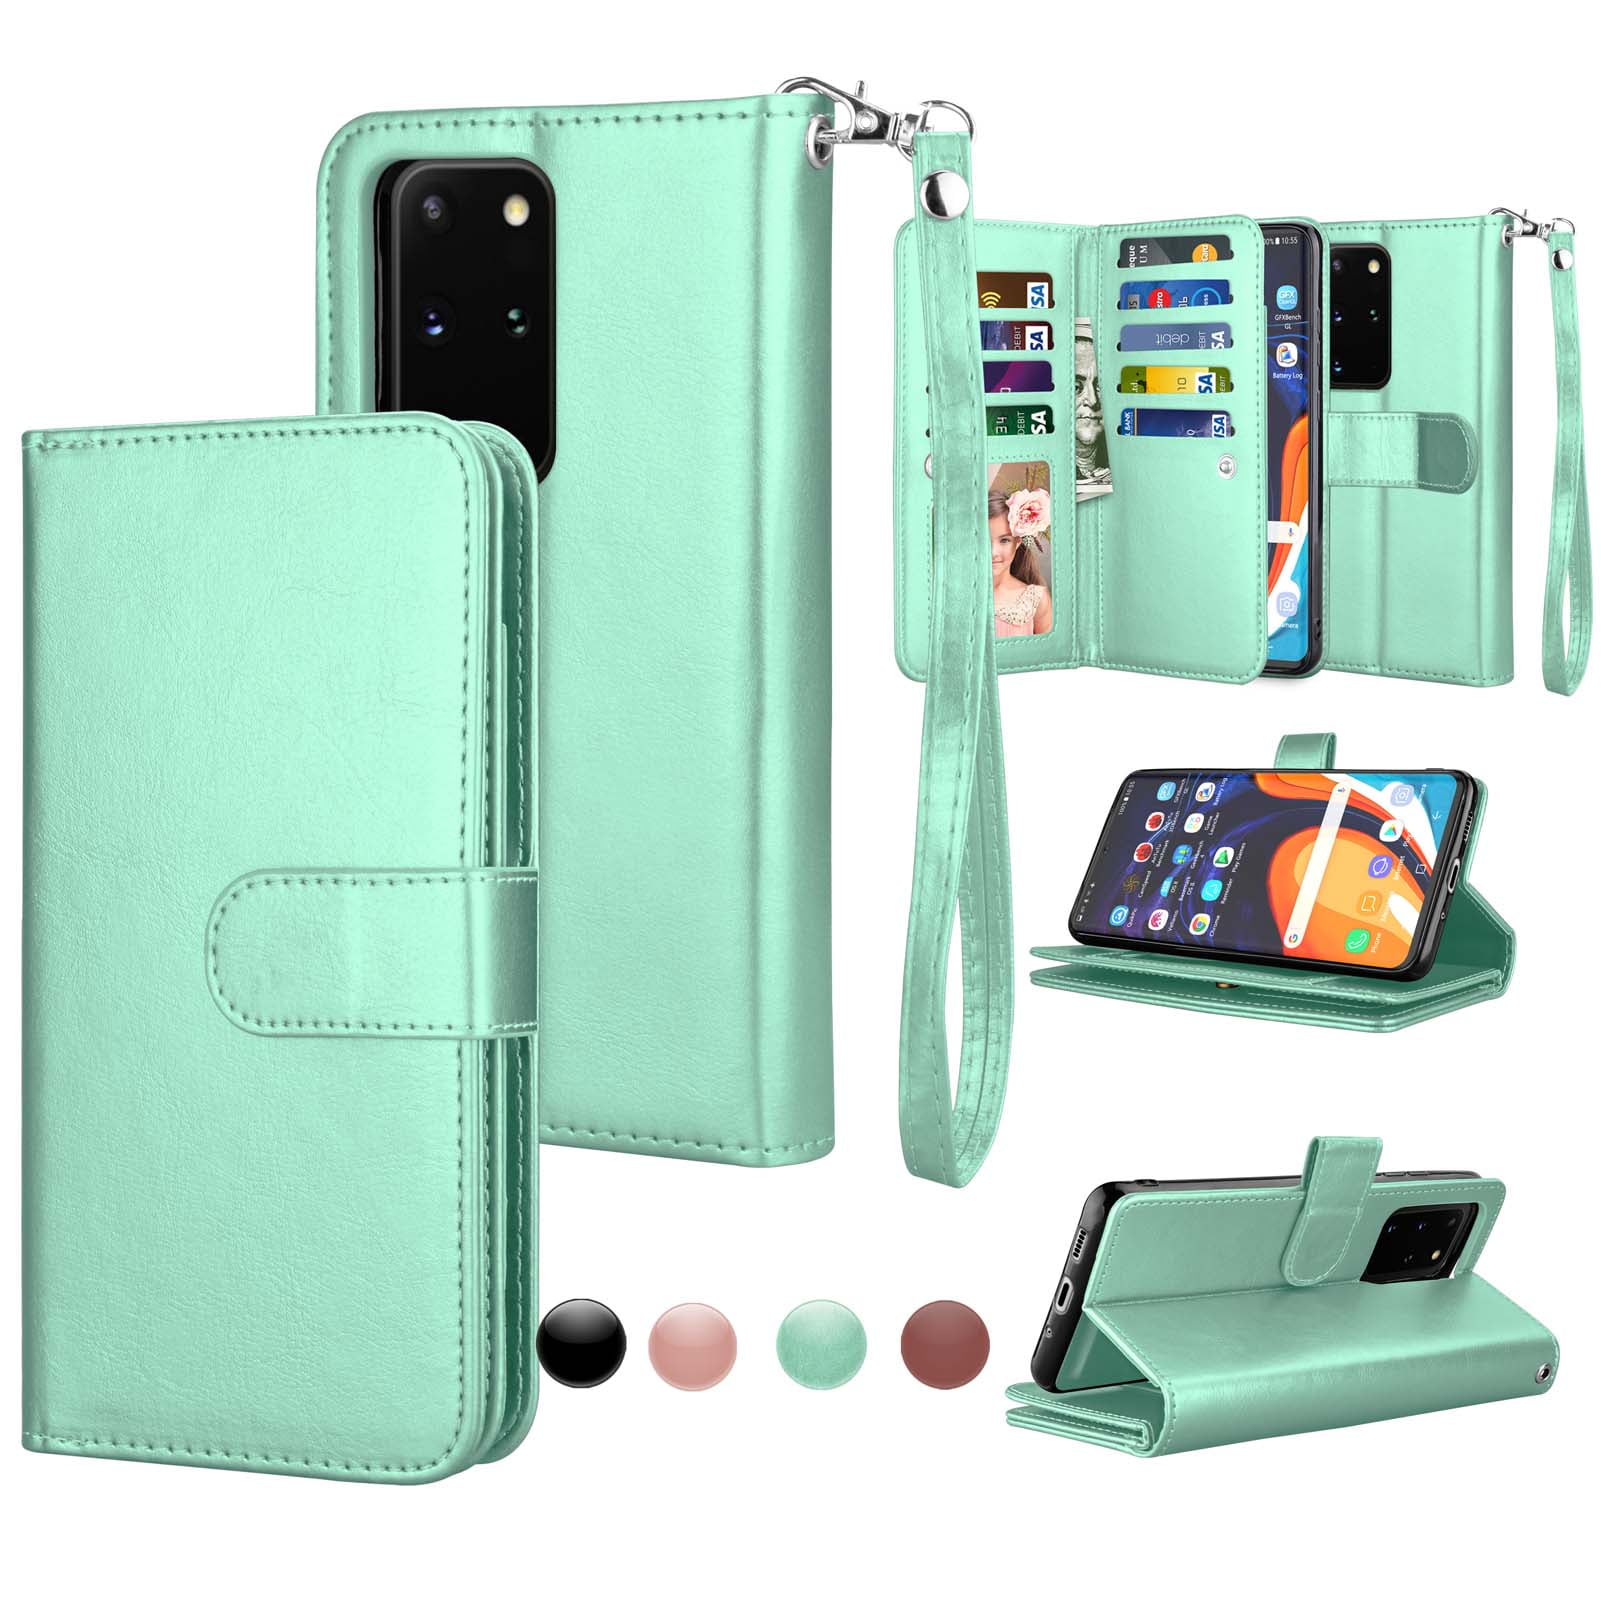 Flip Case for Samsung Galaxy S20 Plus S20+ Compatible with Samsung Galaxy S20 Plus S20+ Soft Blue PU Leather Wallet Cover 